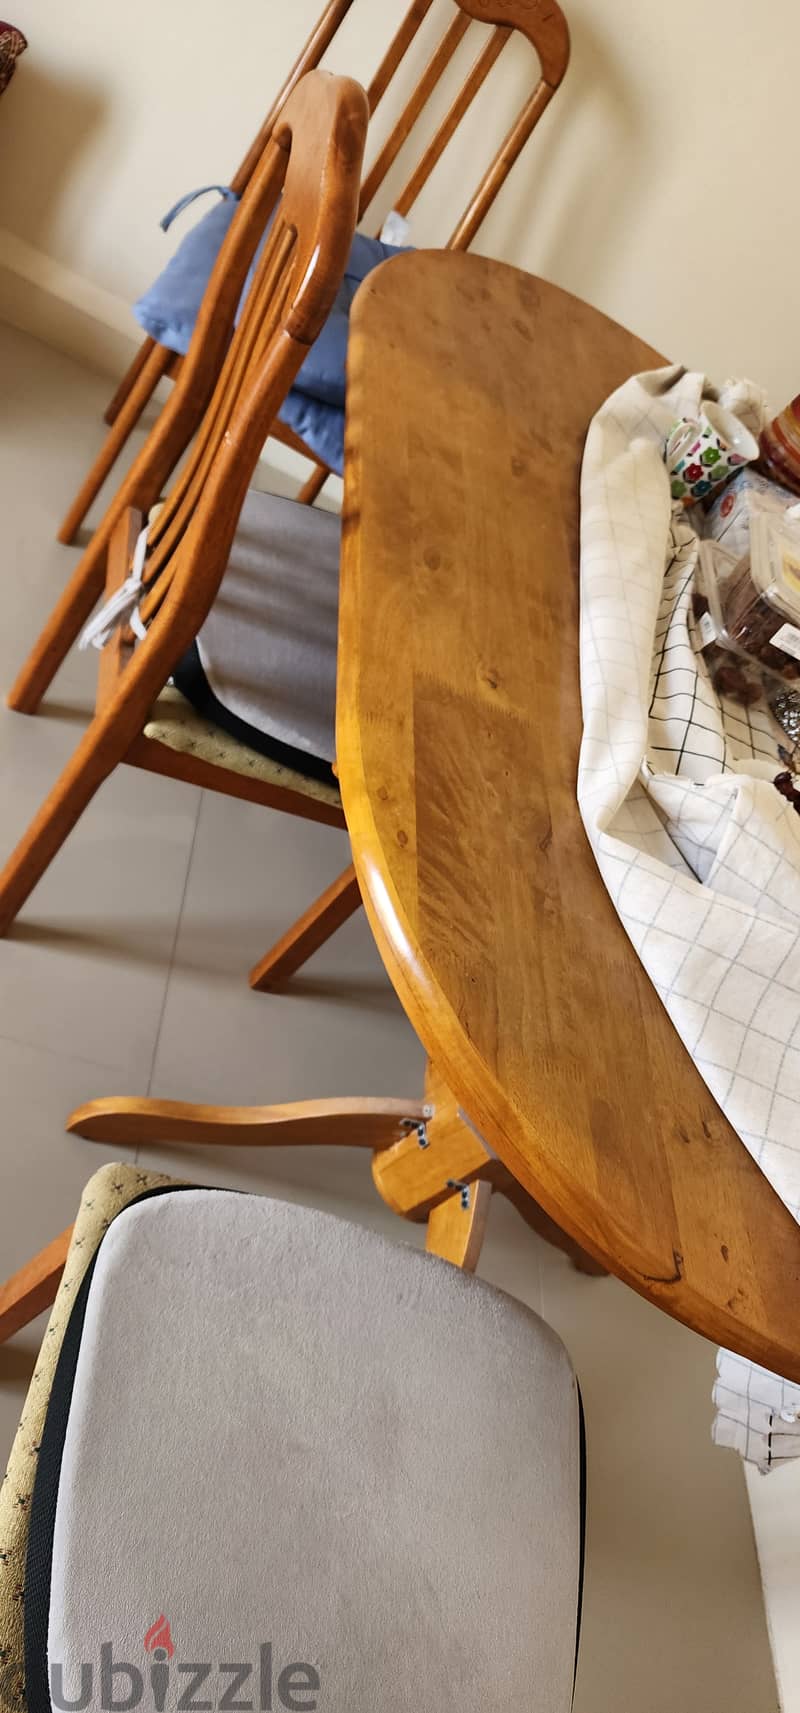 Dining table with Chairs, Good condition 3